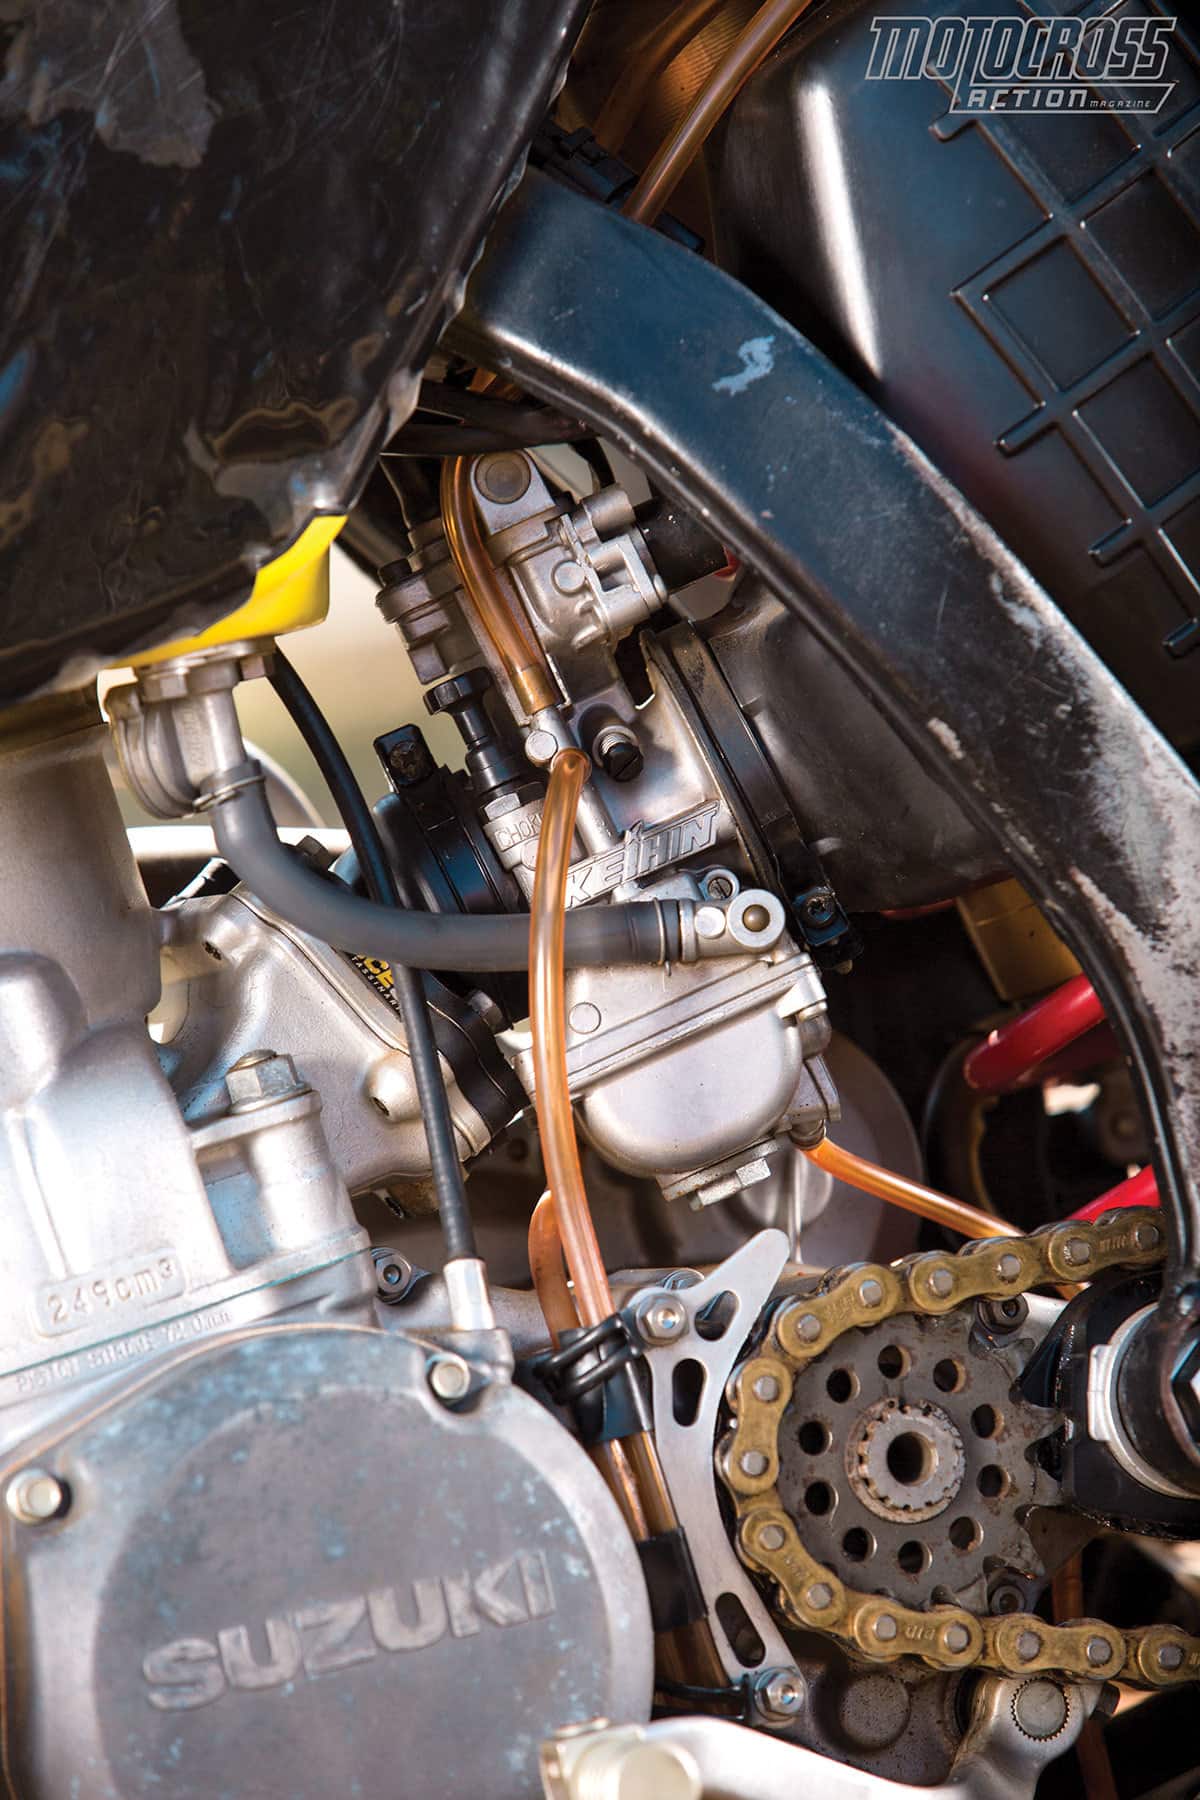 Any serious two-stroke engine tuner will tell you that the greatest gains can be made in a clean carburetor setup. 